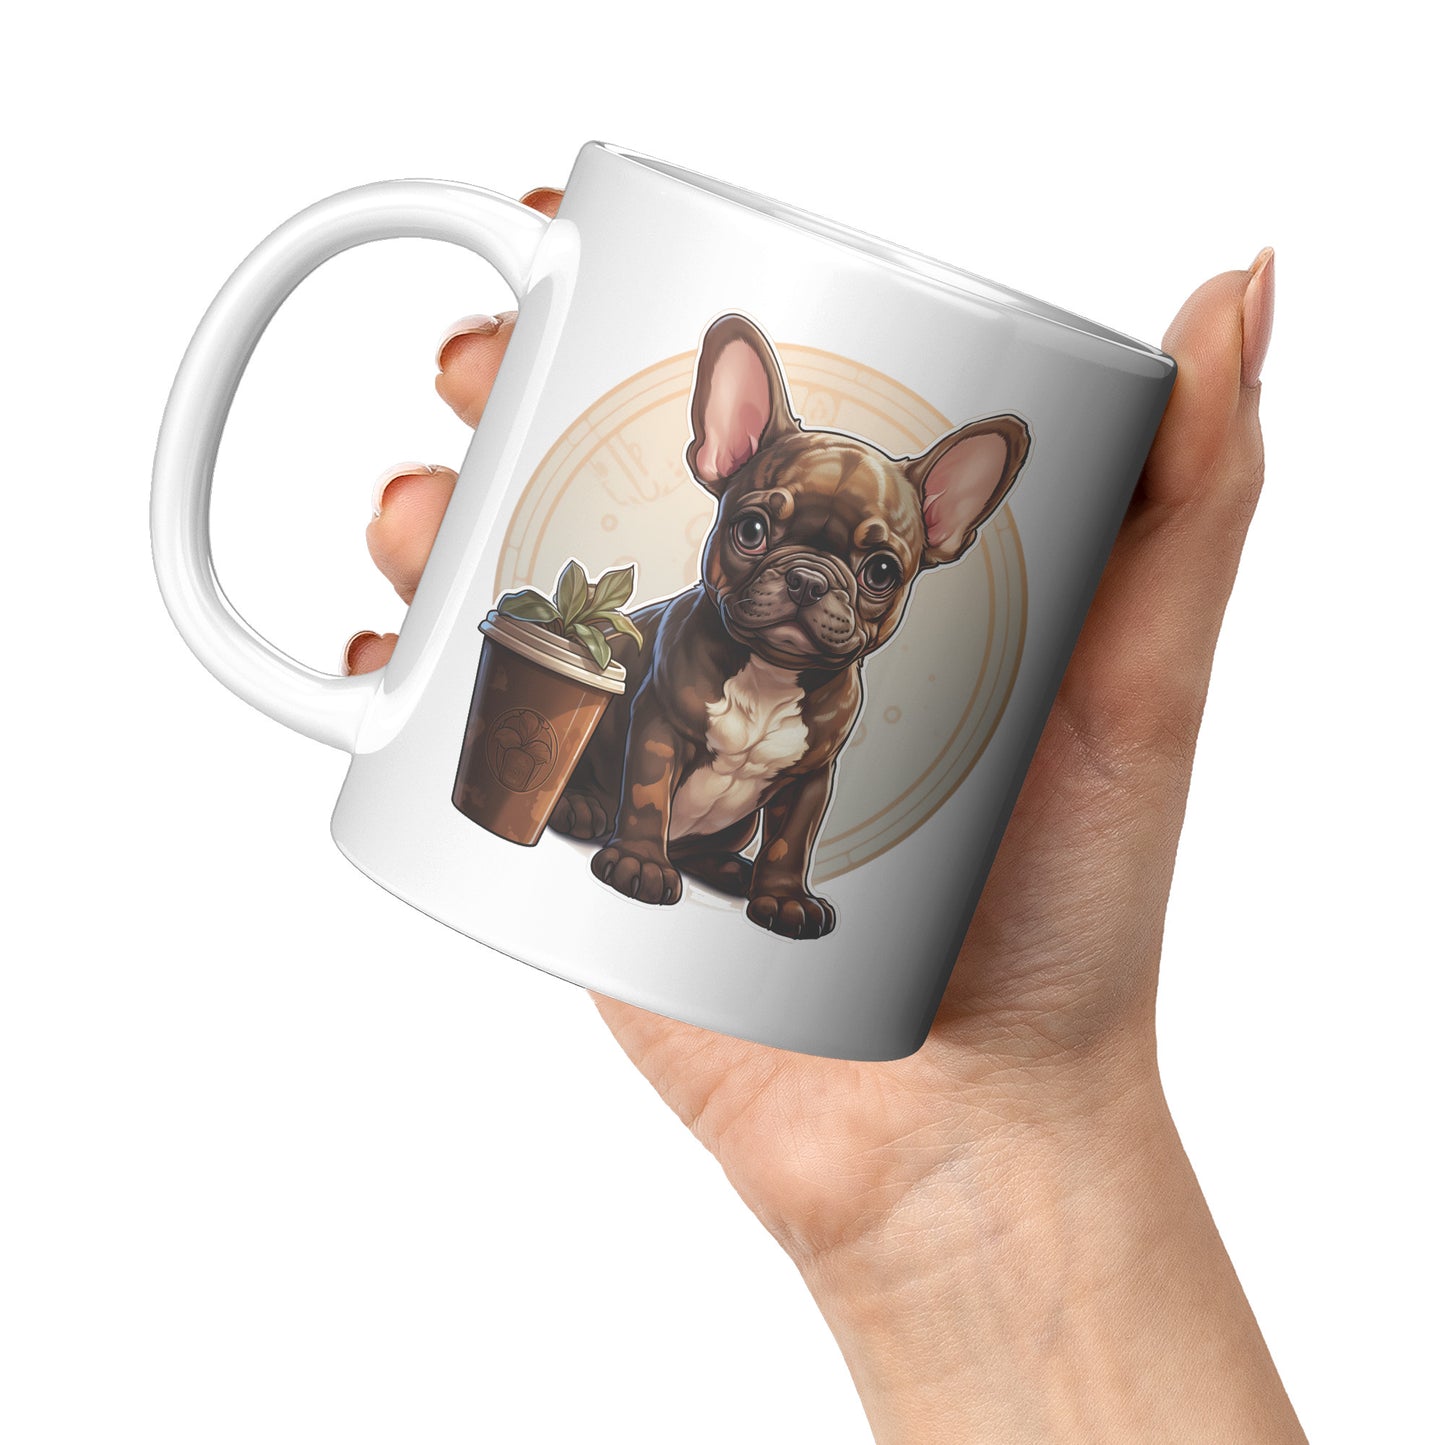 Loveable Frenchie Design Mug - A Must-Have for Dog Lovers